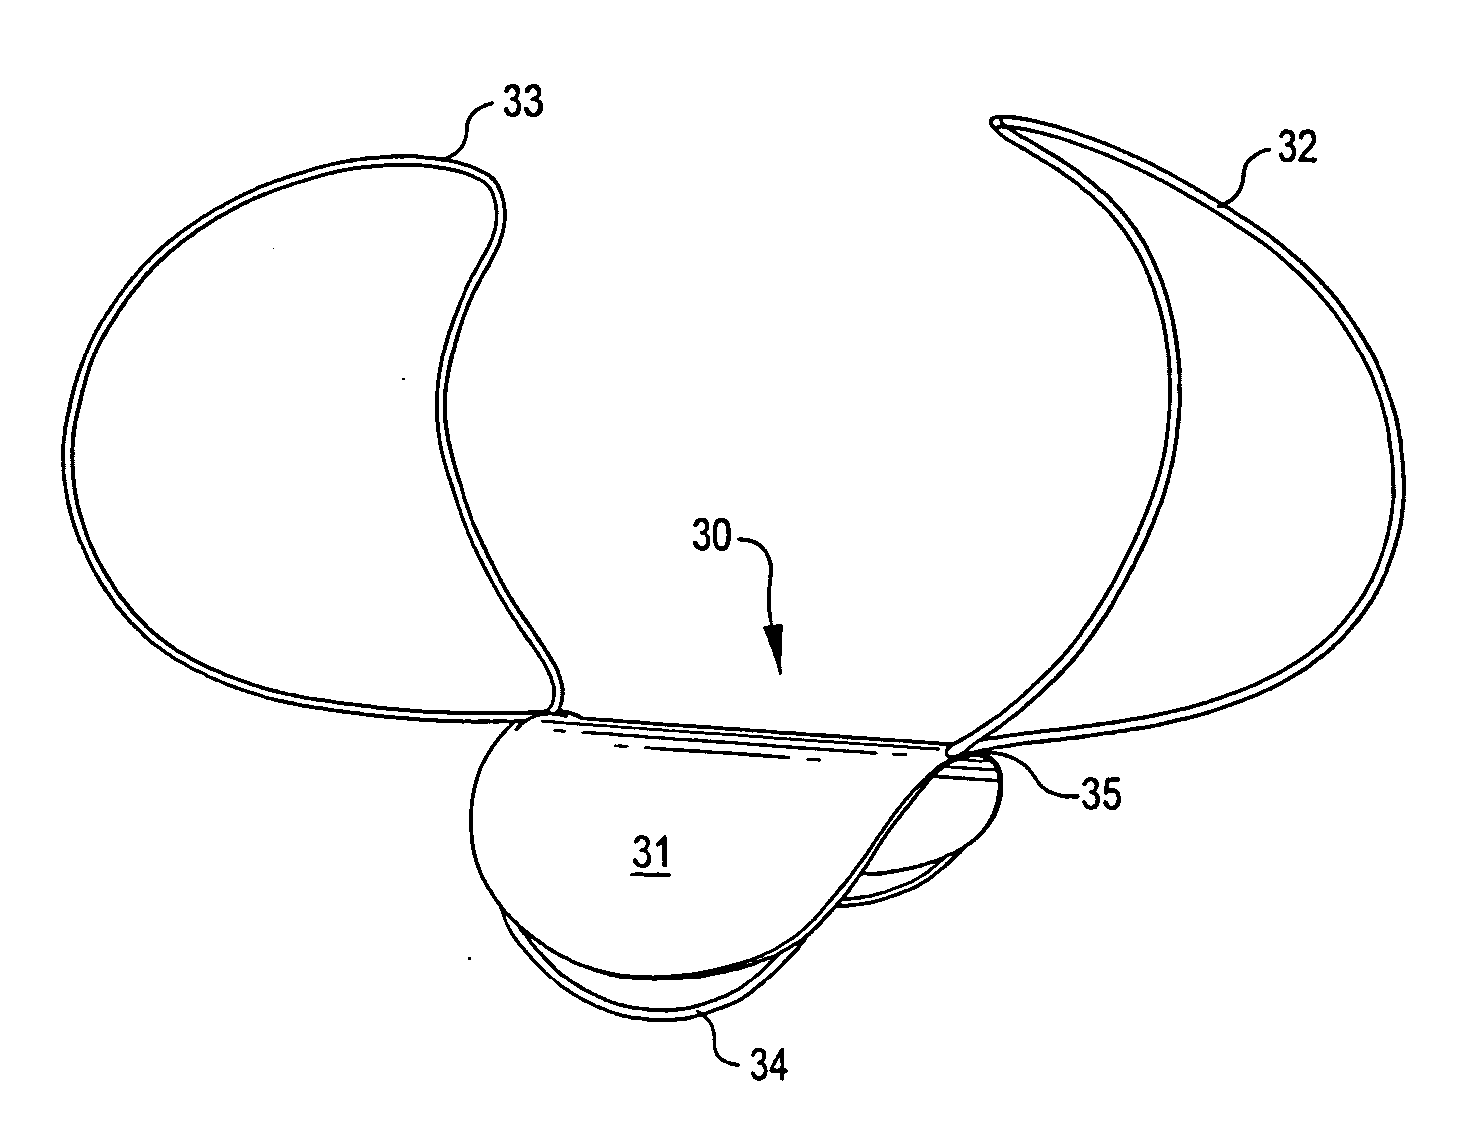 Implantable aneurysm closure systems and methods